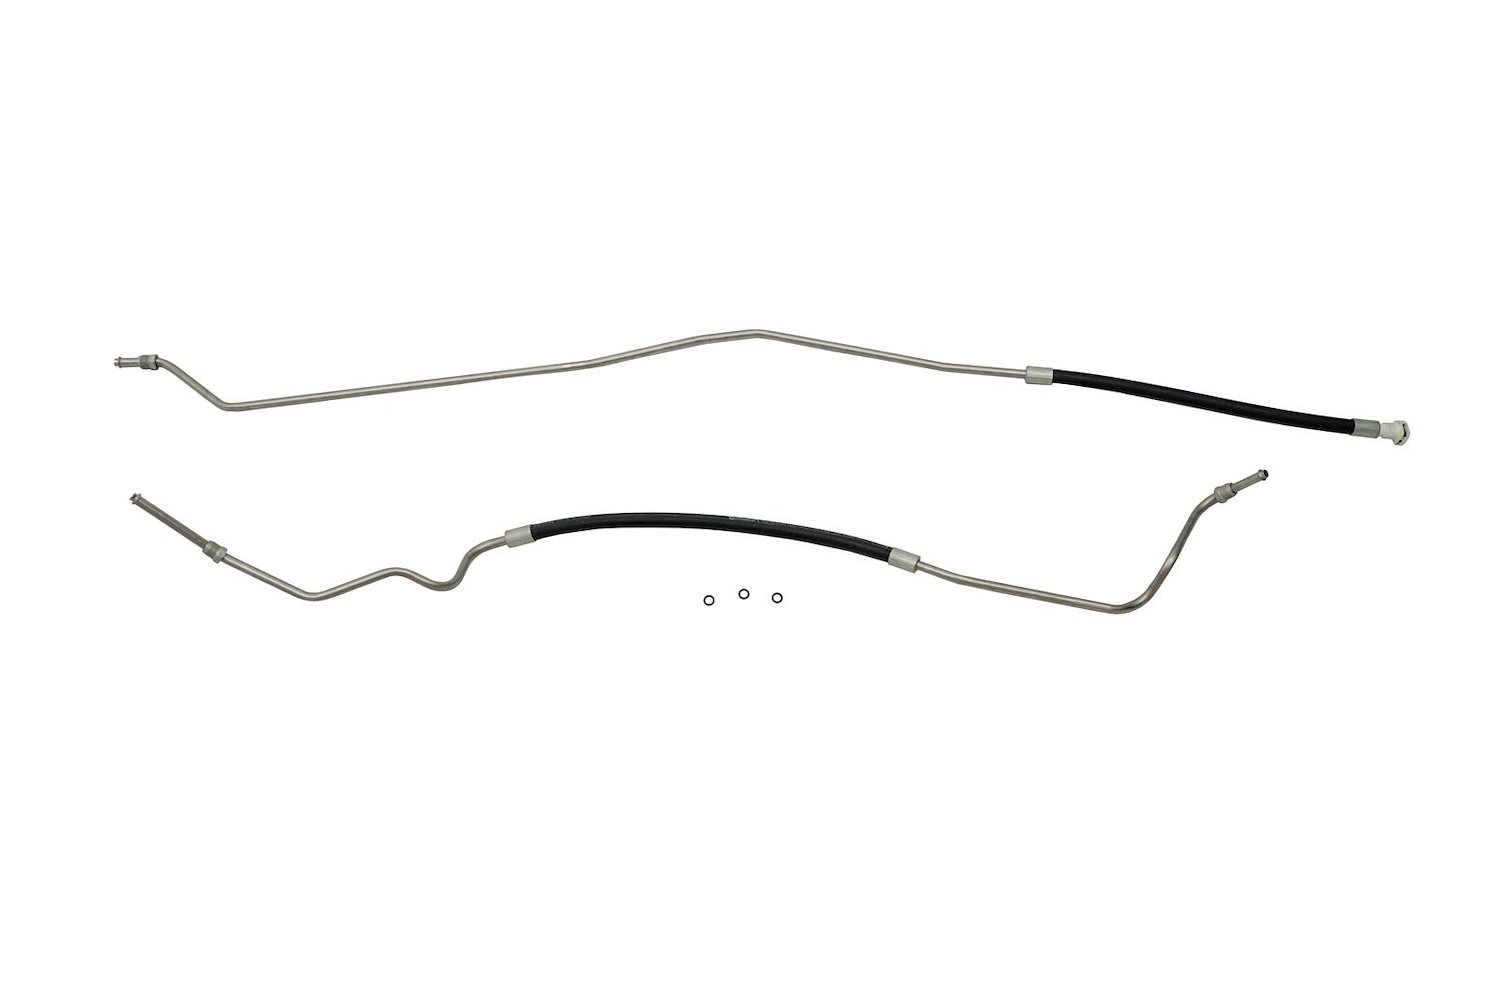 Chevy / GMC Pick Up Fuel Supply Line -1996 1997 1998